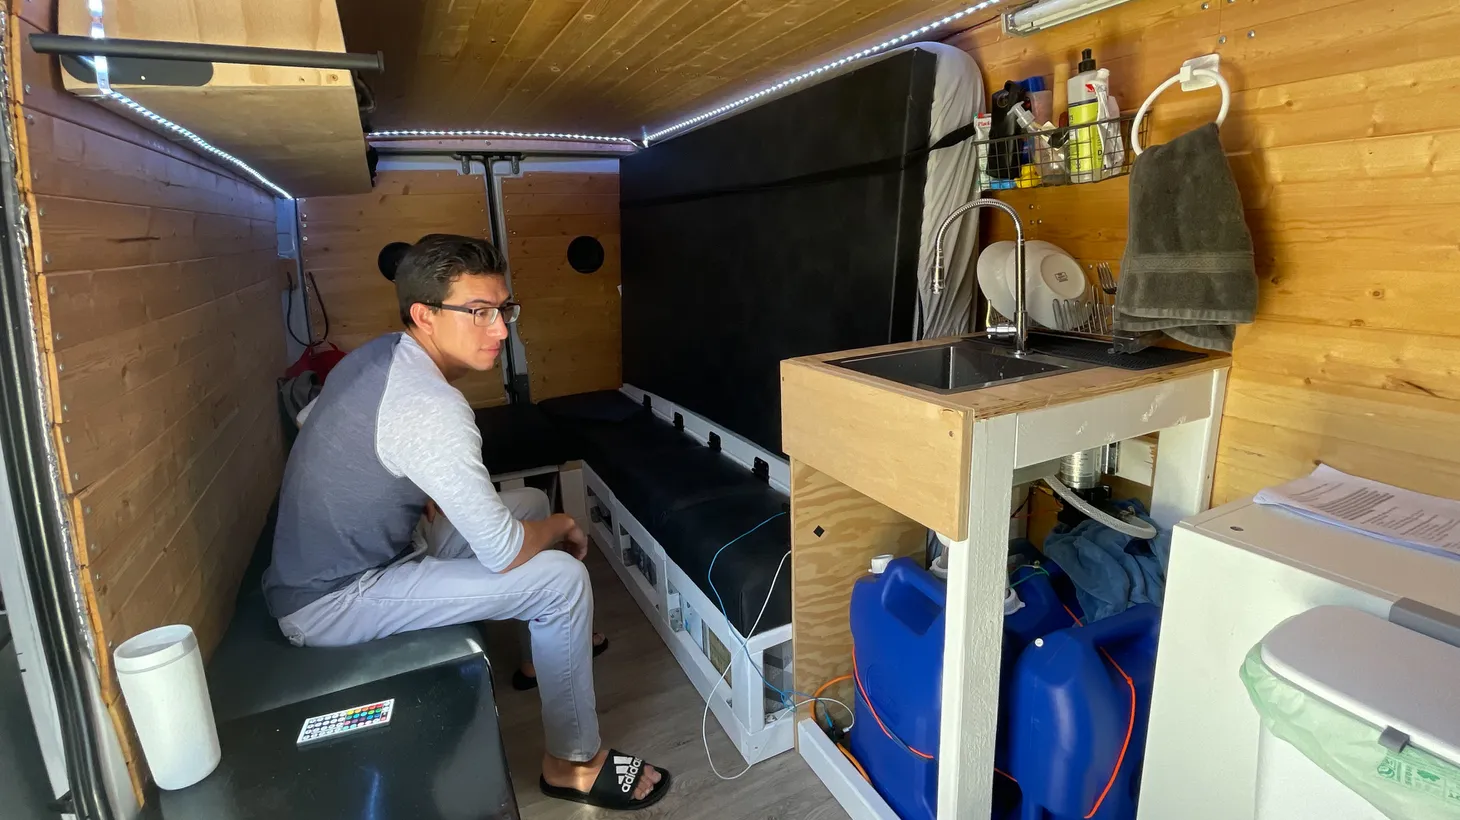 “I've been given housing offers by friends that I’m meeting, and I think I'd rather stick it out in the van. Just saves me money. It's my own little space, I don't share it with anyone. And I just like making upgrades,” says UCSB student James Estrada.